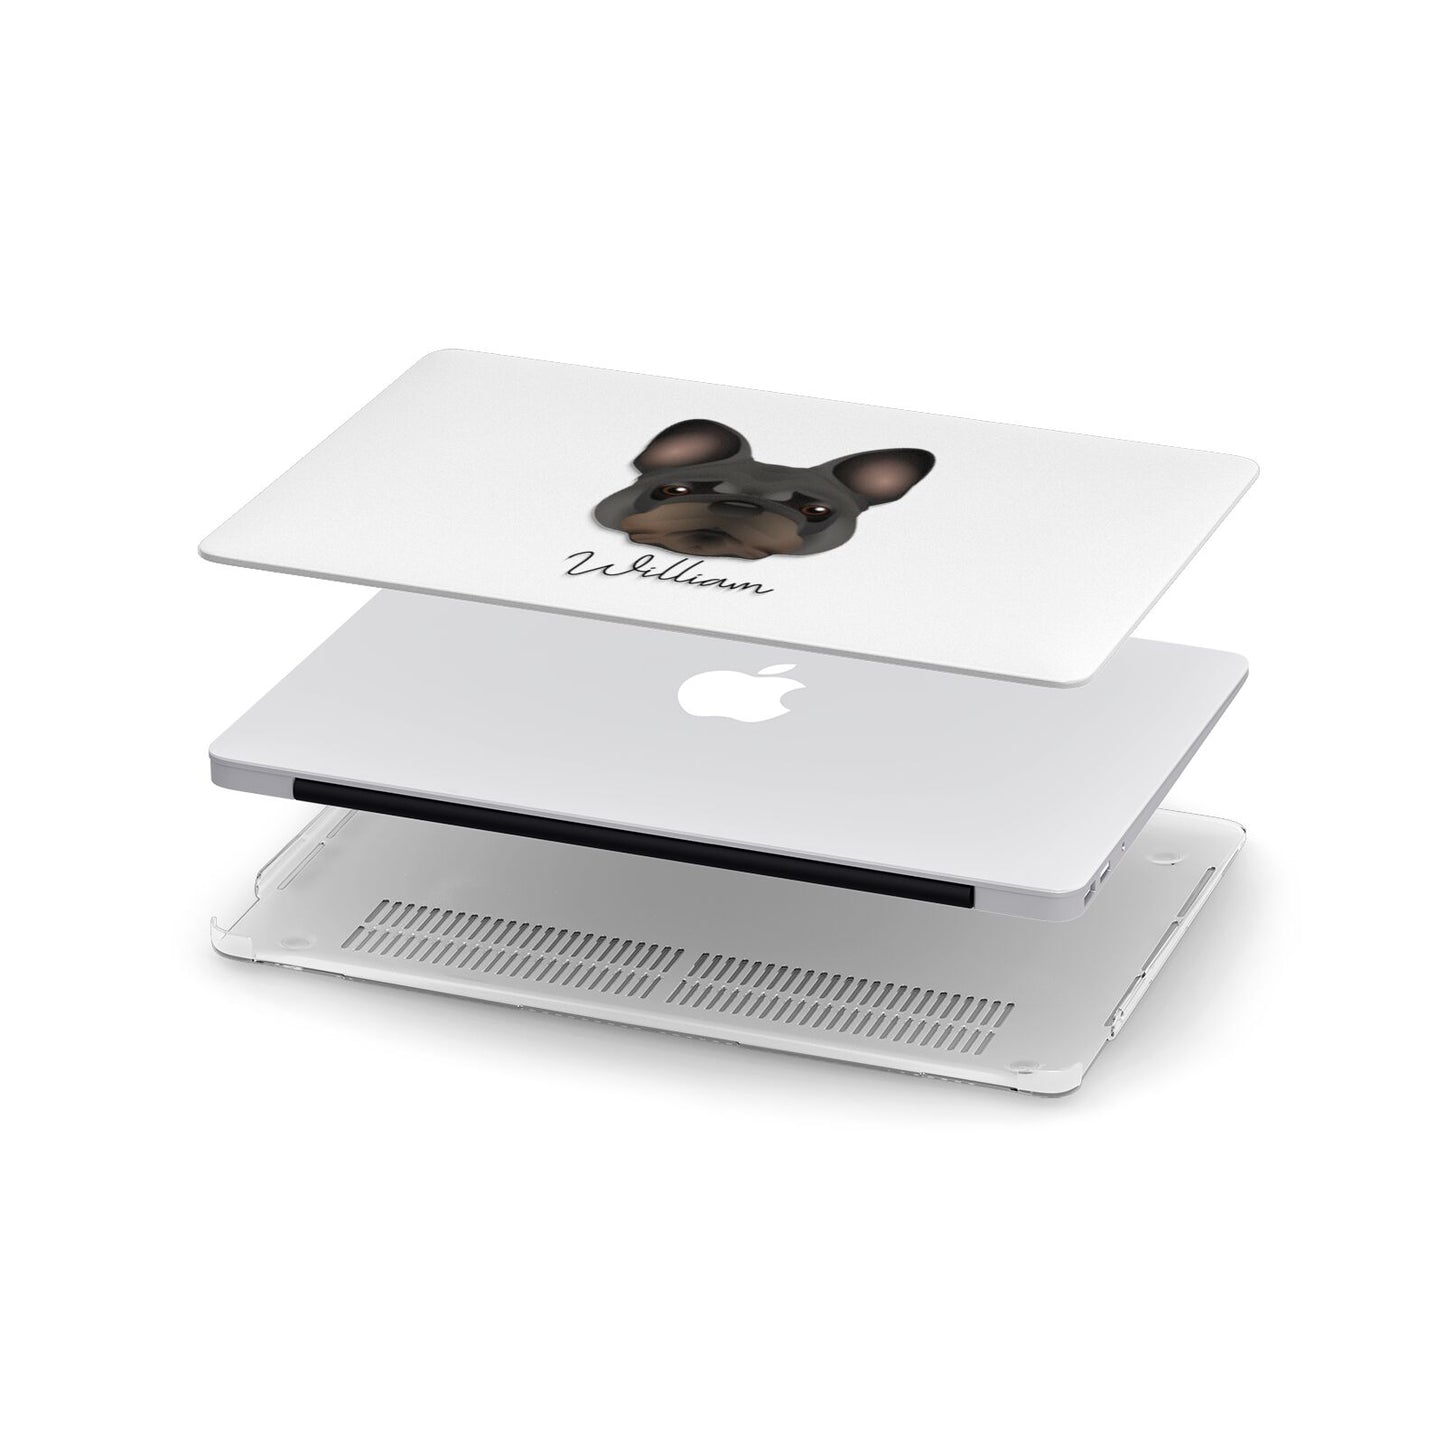 French Bulldog Personalised Apple MacBook Case in Detail